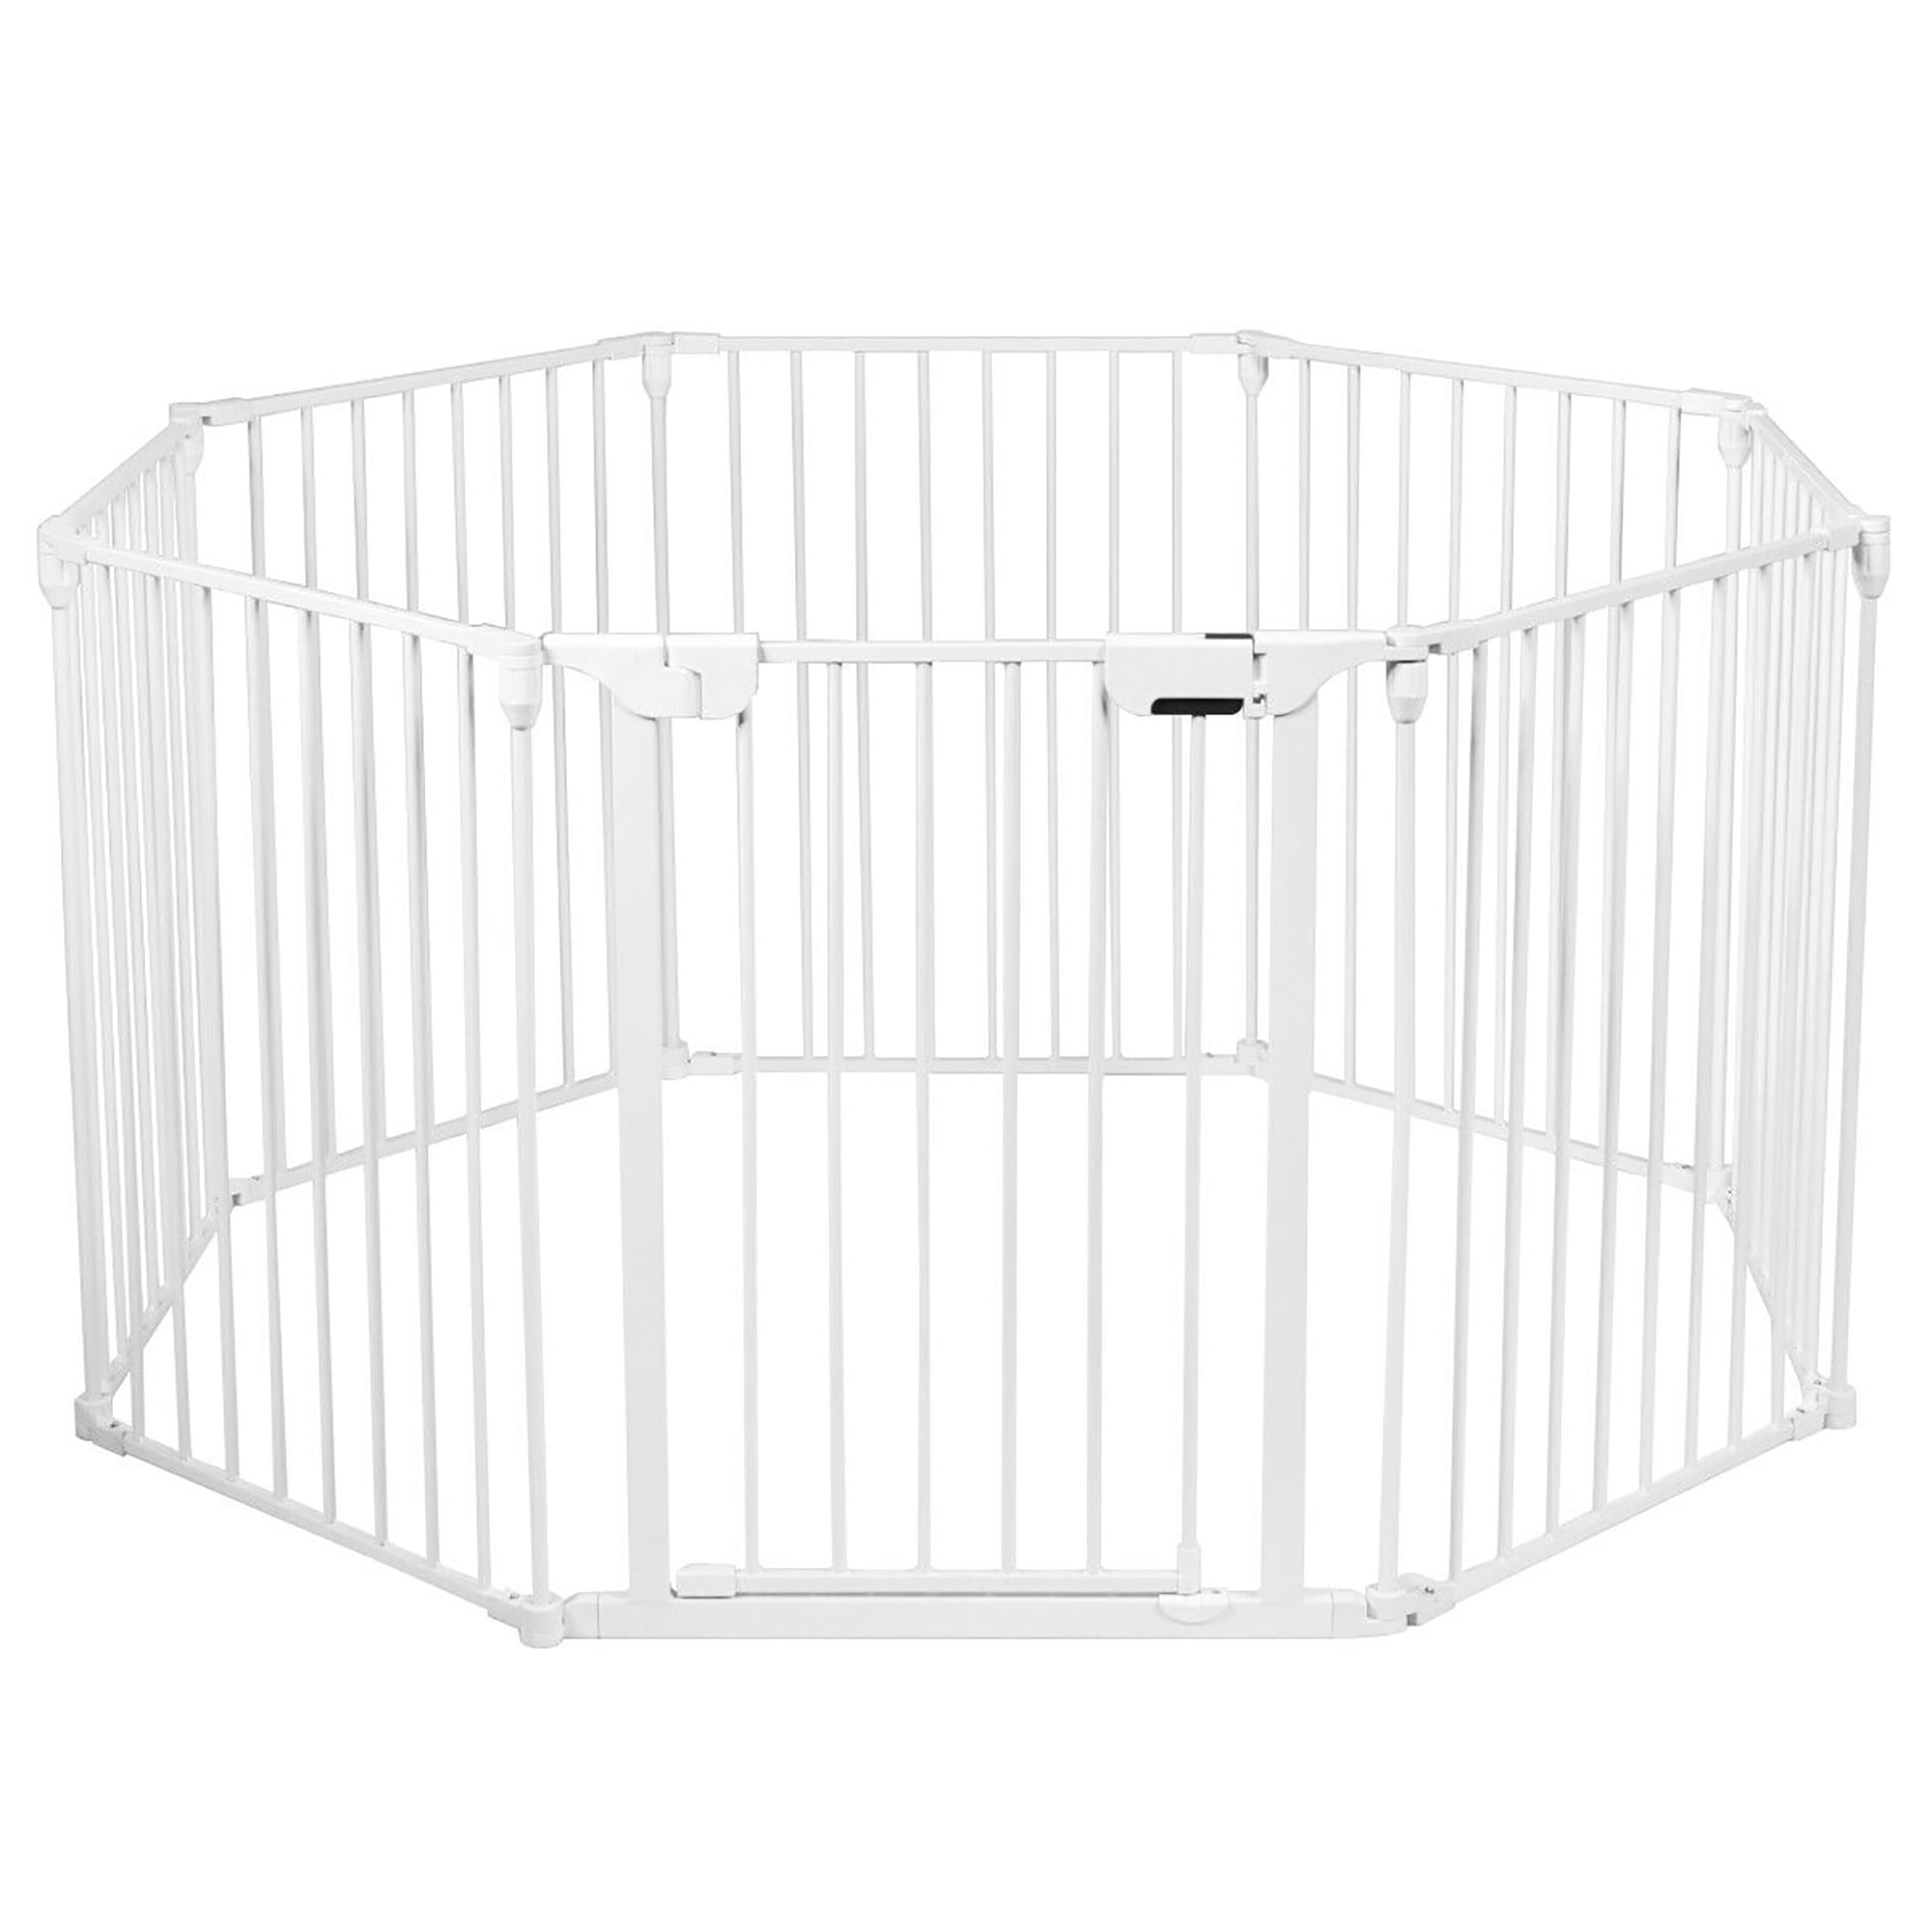 White, 8-Panel Costzon Baby Safety Gate 181-Inch Extra Wide Fireplace Fence with Walk-Through Door in Two Directions Wall-Mount Metal Gate for Pet & Child Add/Decrease Panels Directly 